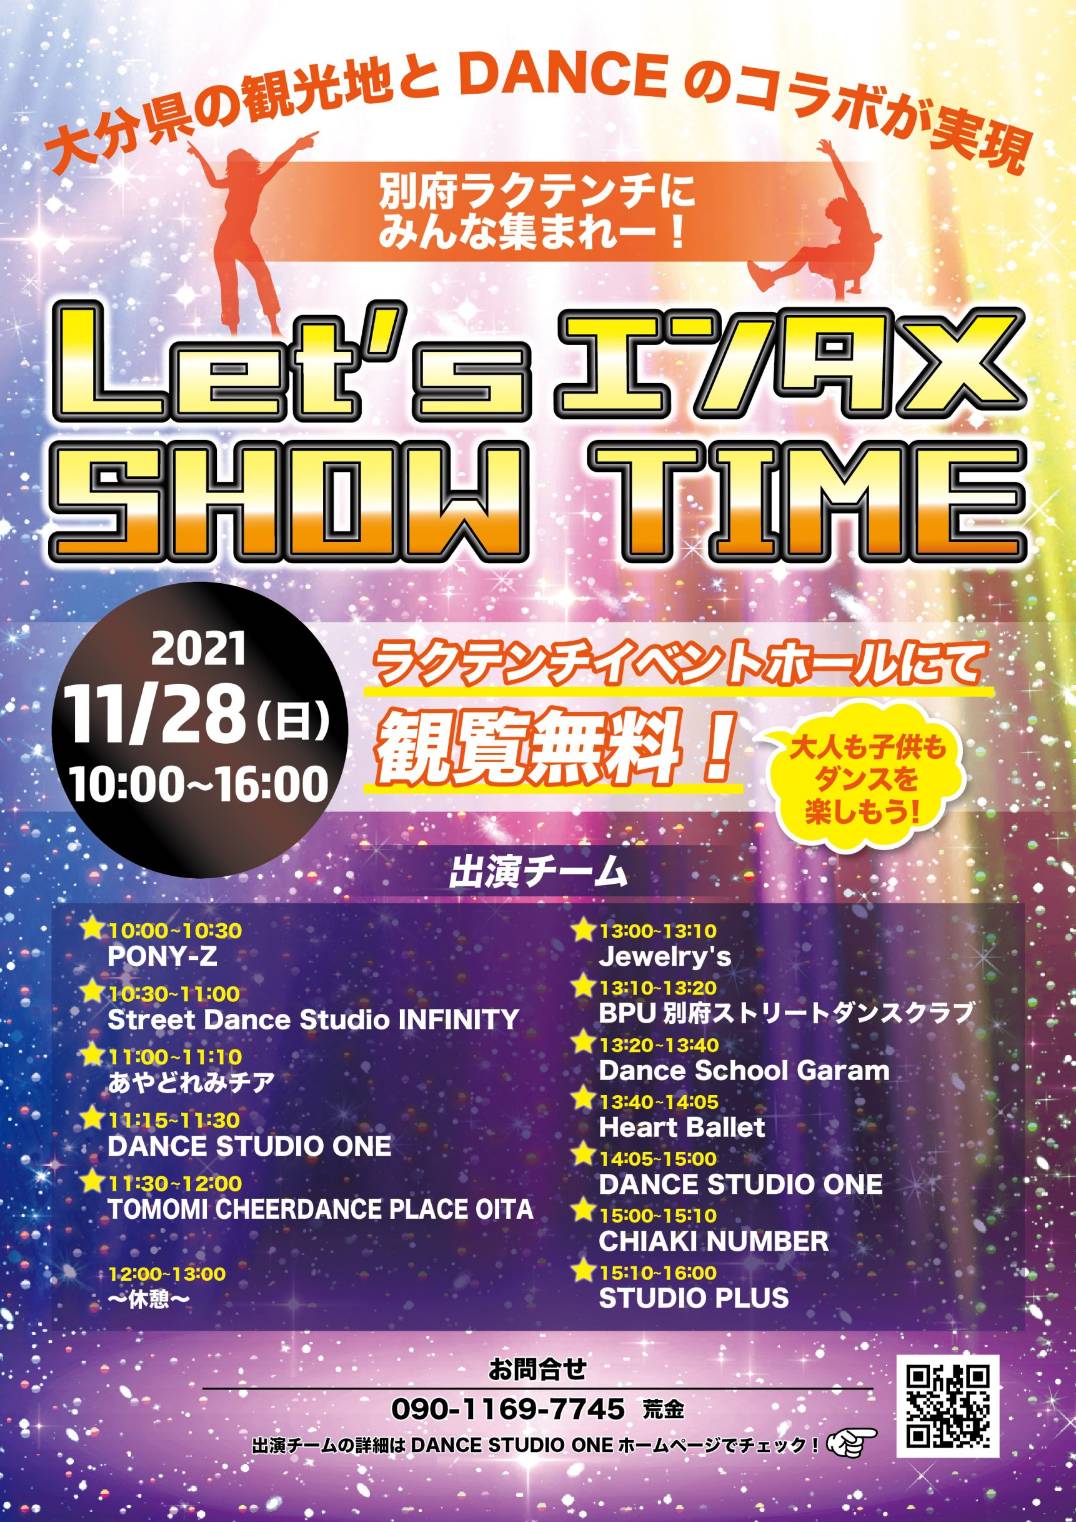 Let’sエンタメSHOW TIME2021開催！